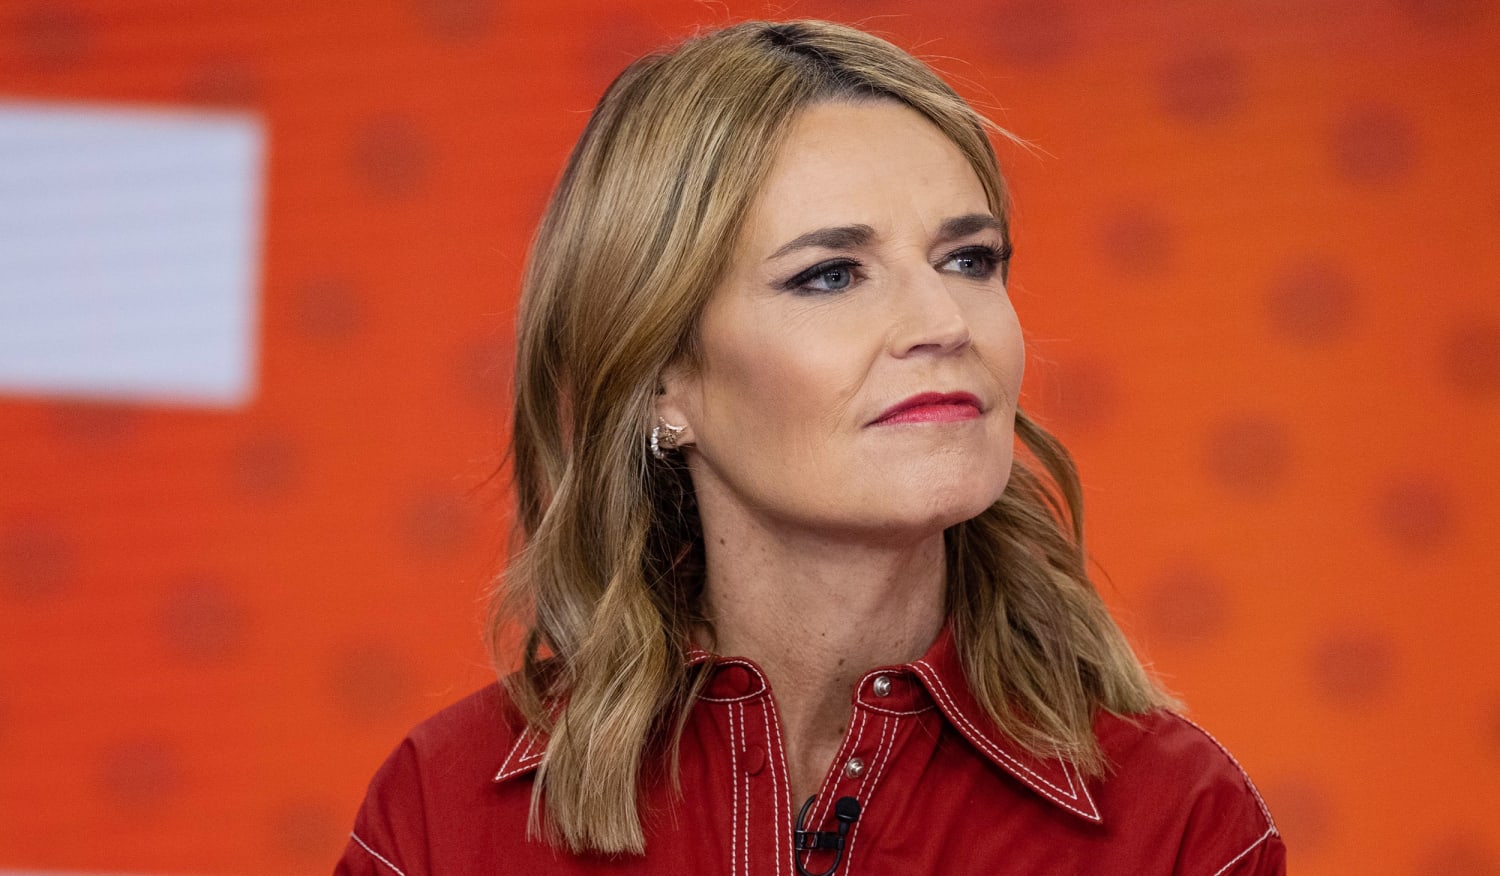 Is Savannah Guthrie Leaving "Today"? What is the Reason?